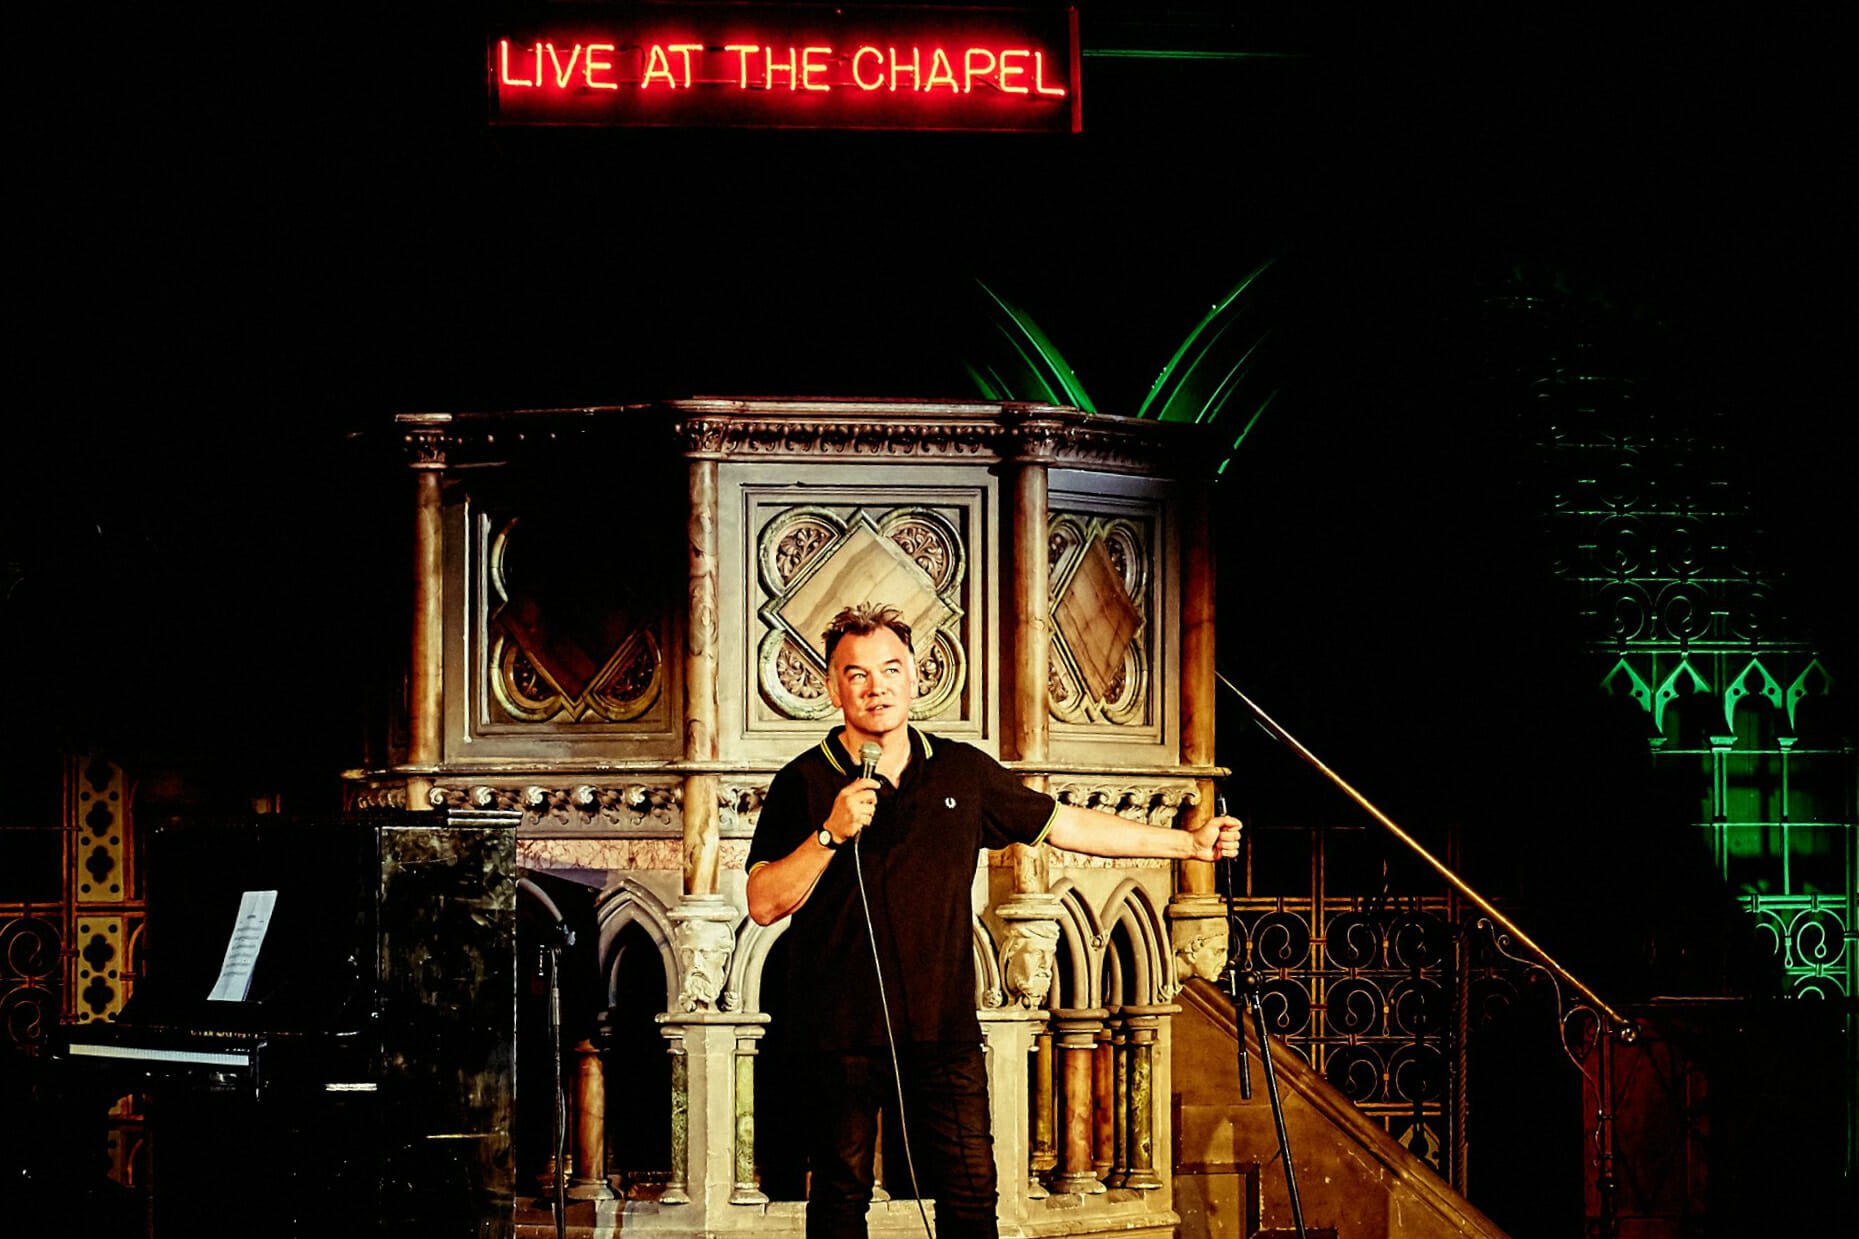 Live At The Chapel